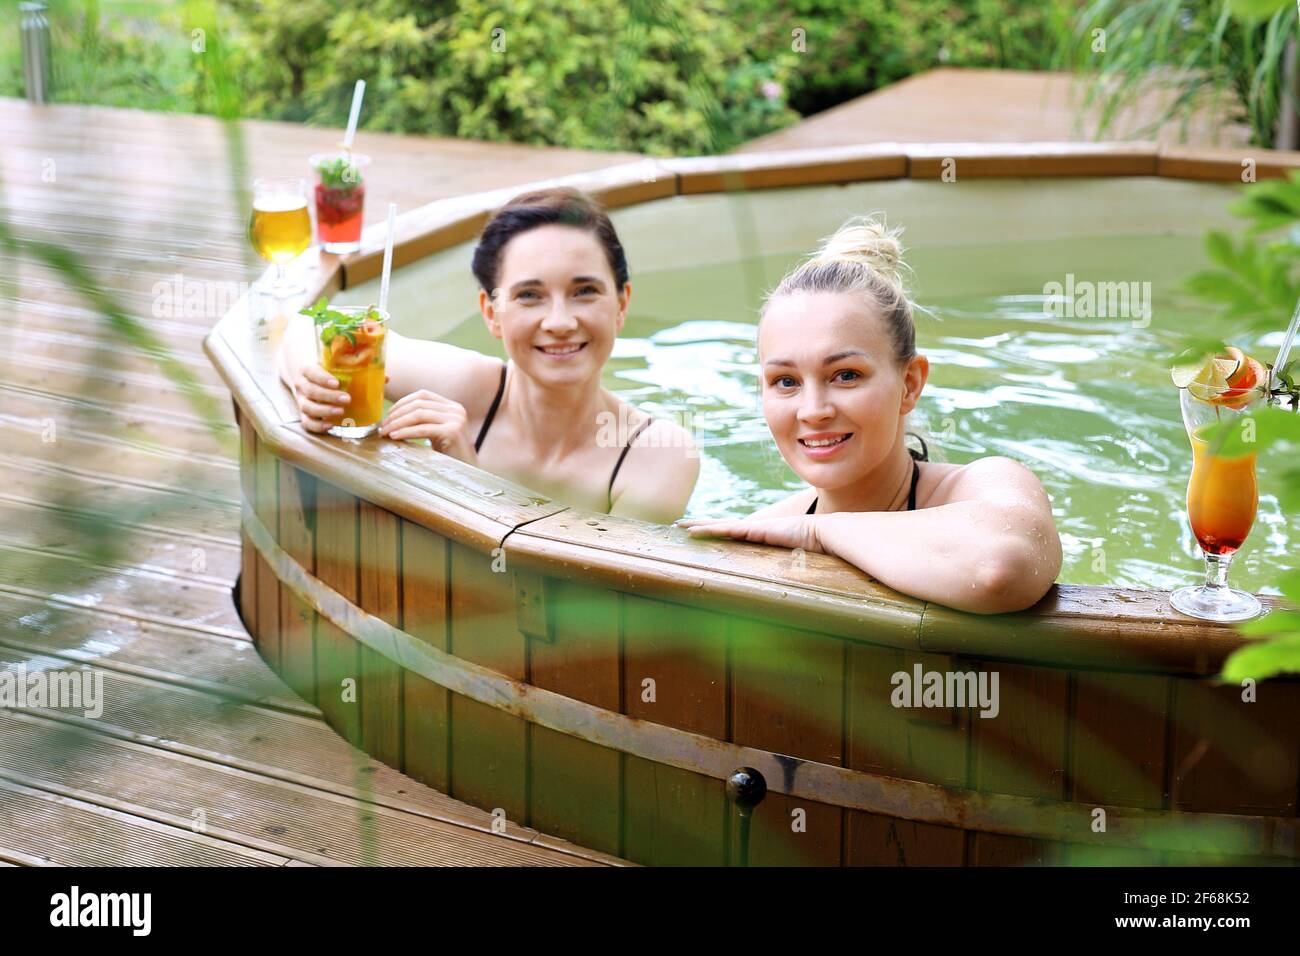 Bathing in a spa tub. Two beautiful women enjoy a relaxing bath in the tub. Girl friends at the spa. Stock Photo